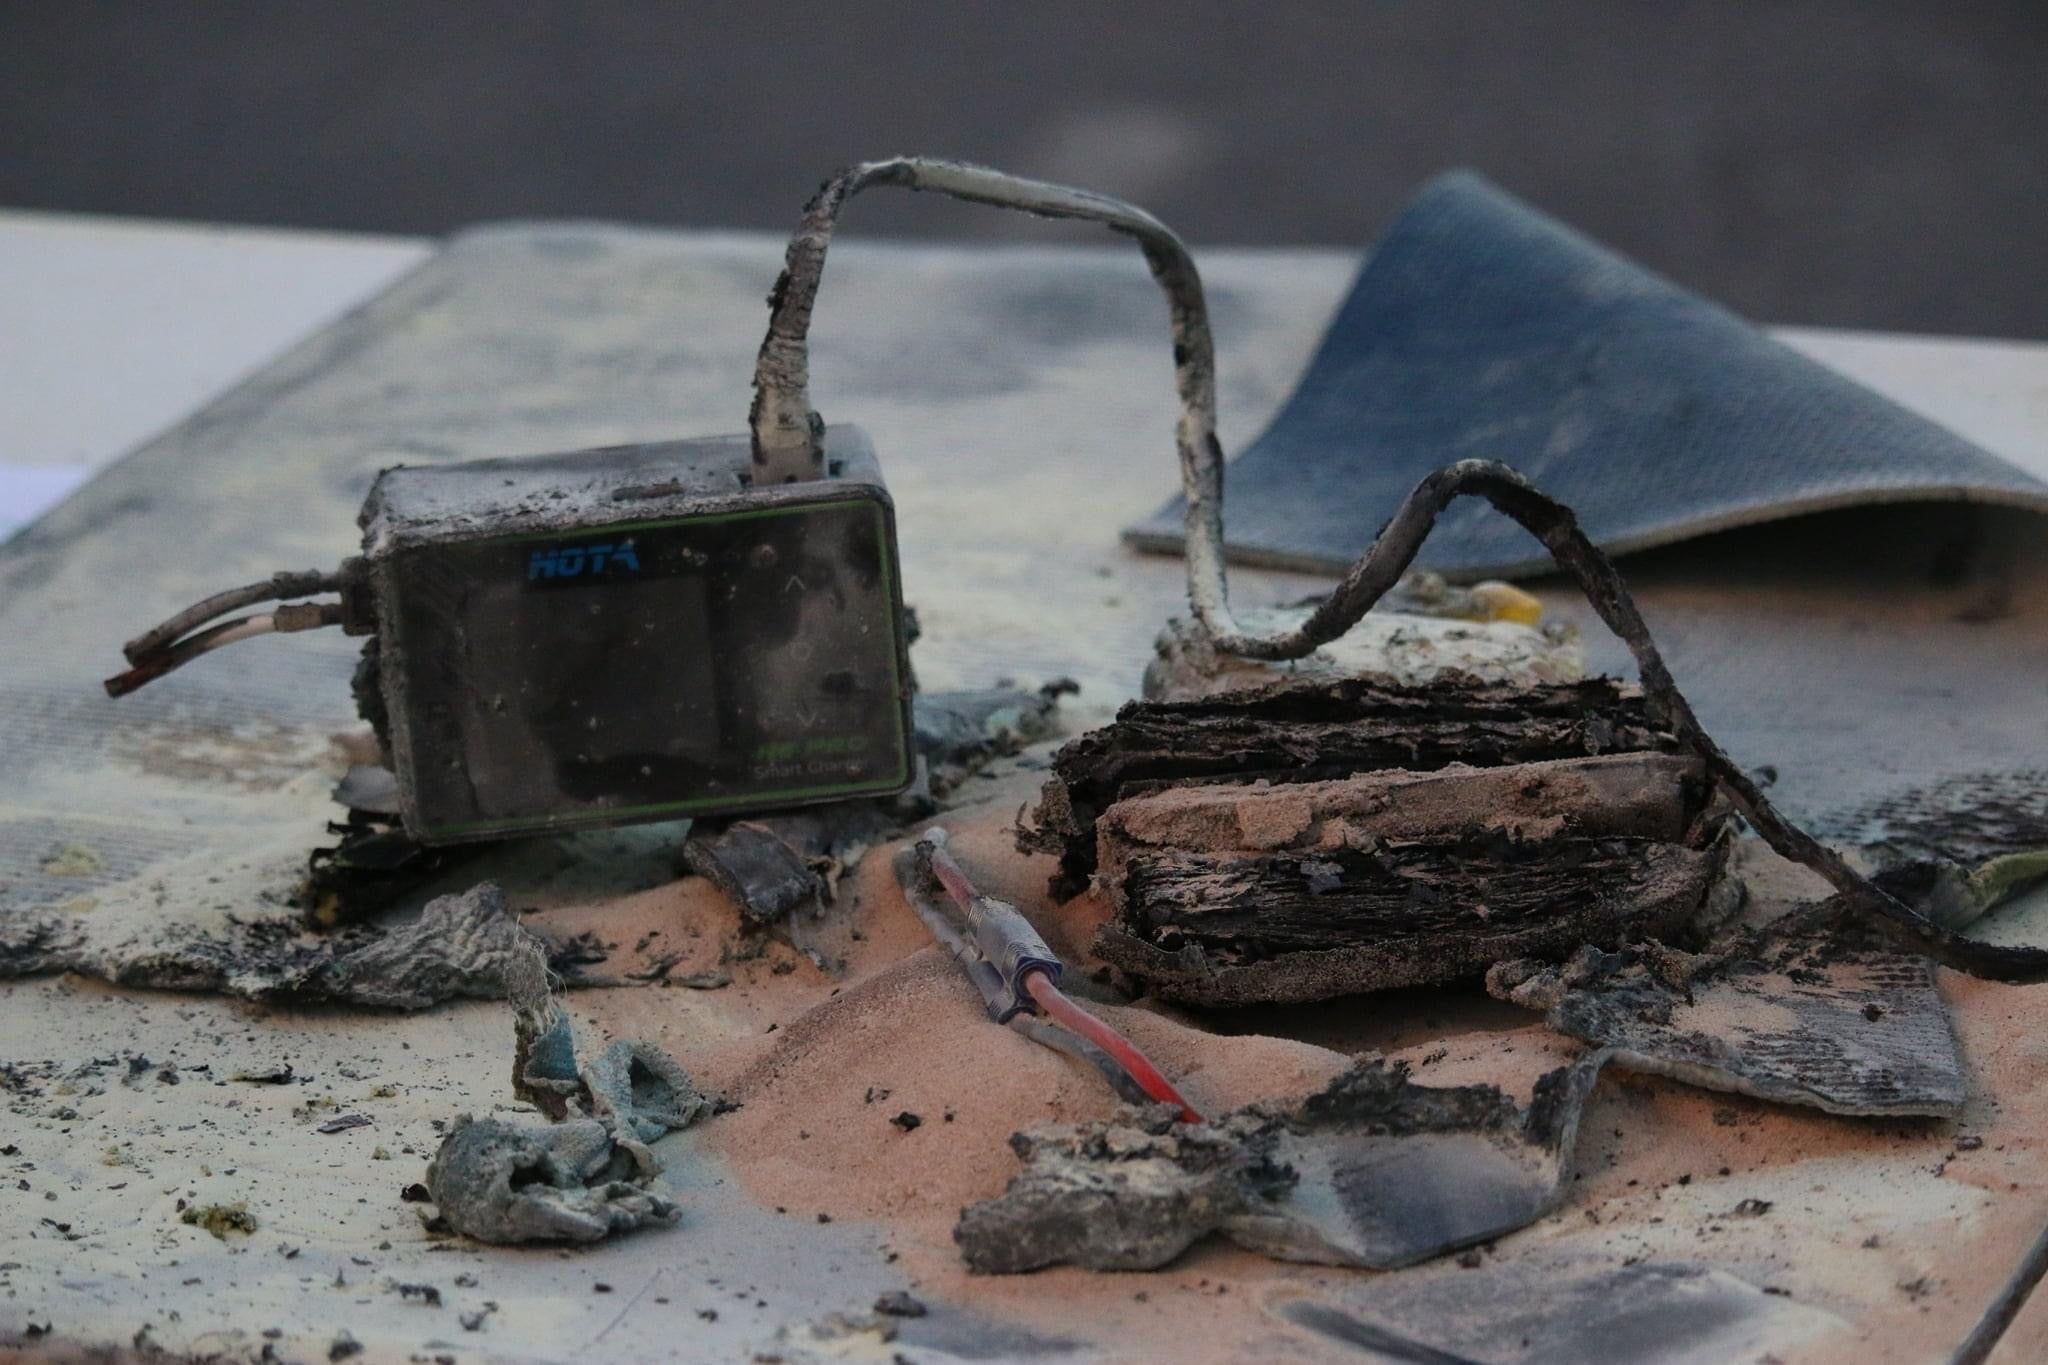 A charred lipo battery and charger after a fire